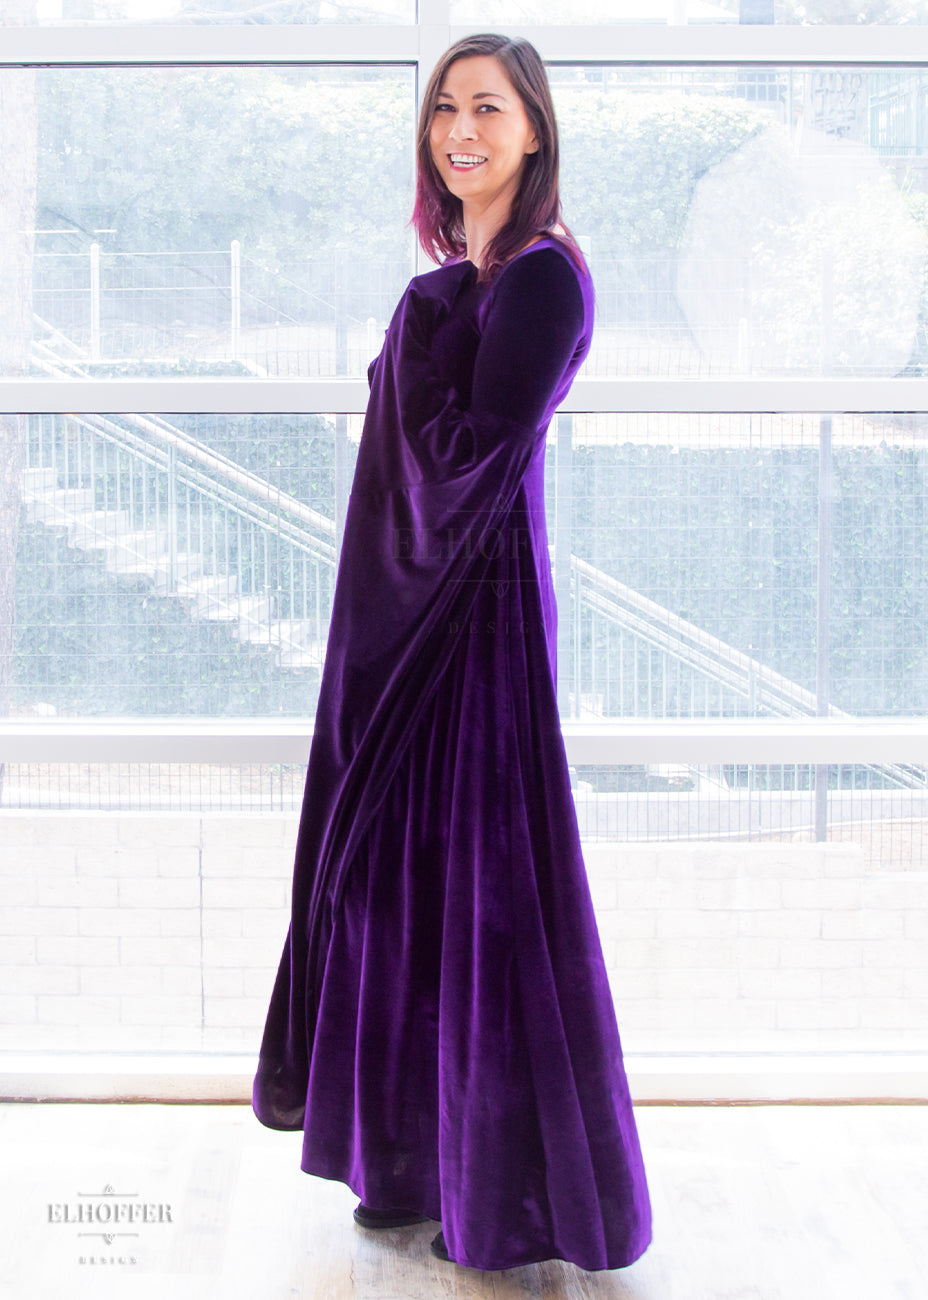 Susan wears the size extra small velvet gown. Her measurements are 32" Bust, 25" Waist, 36” Hips, and she is 5'9" tall.